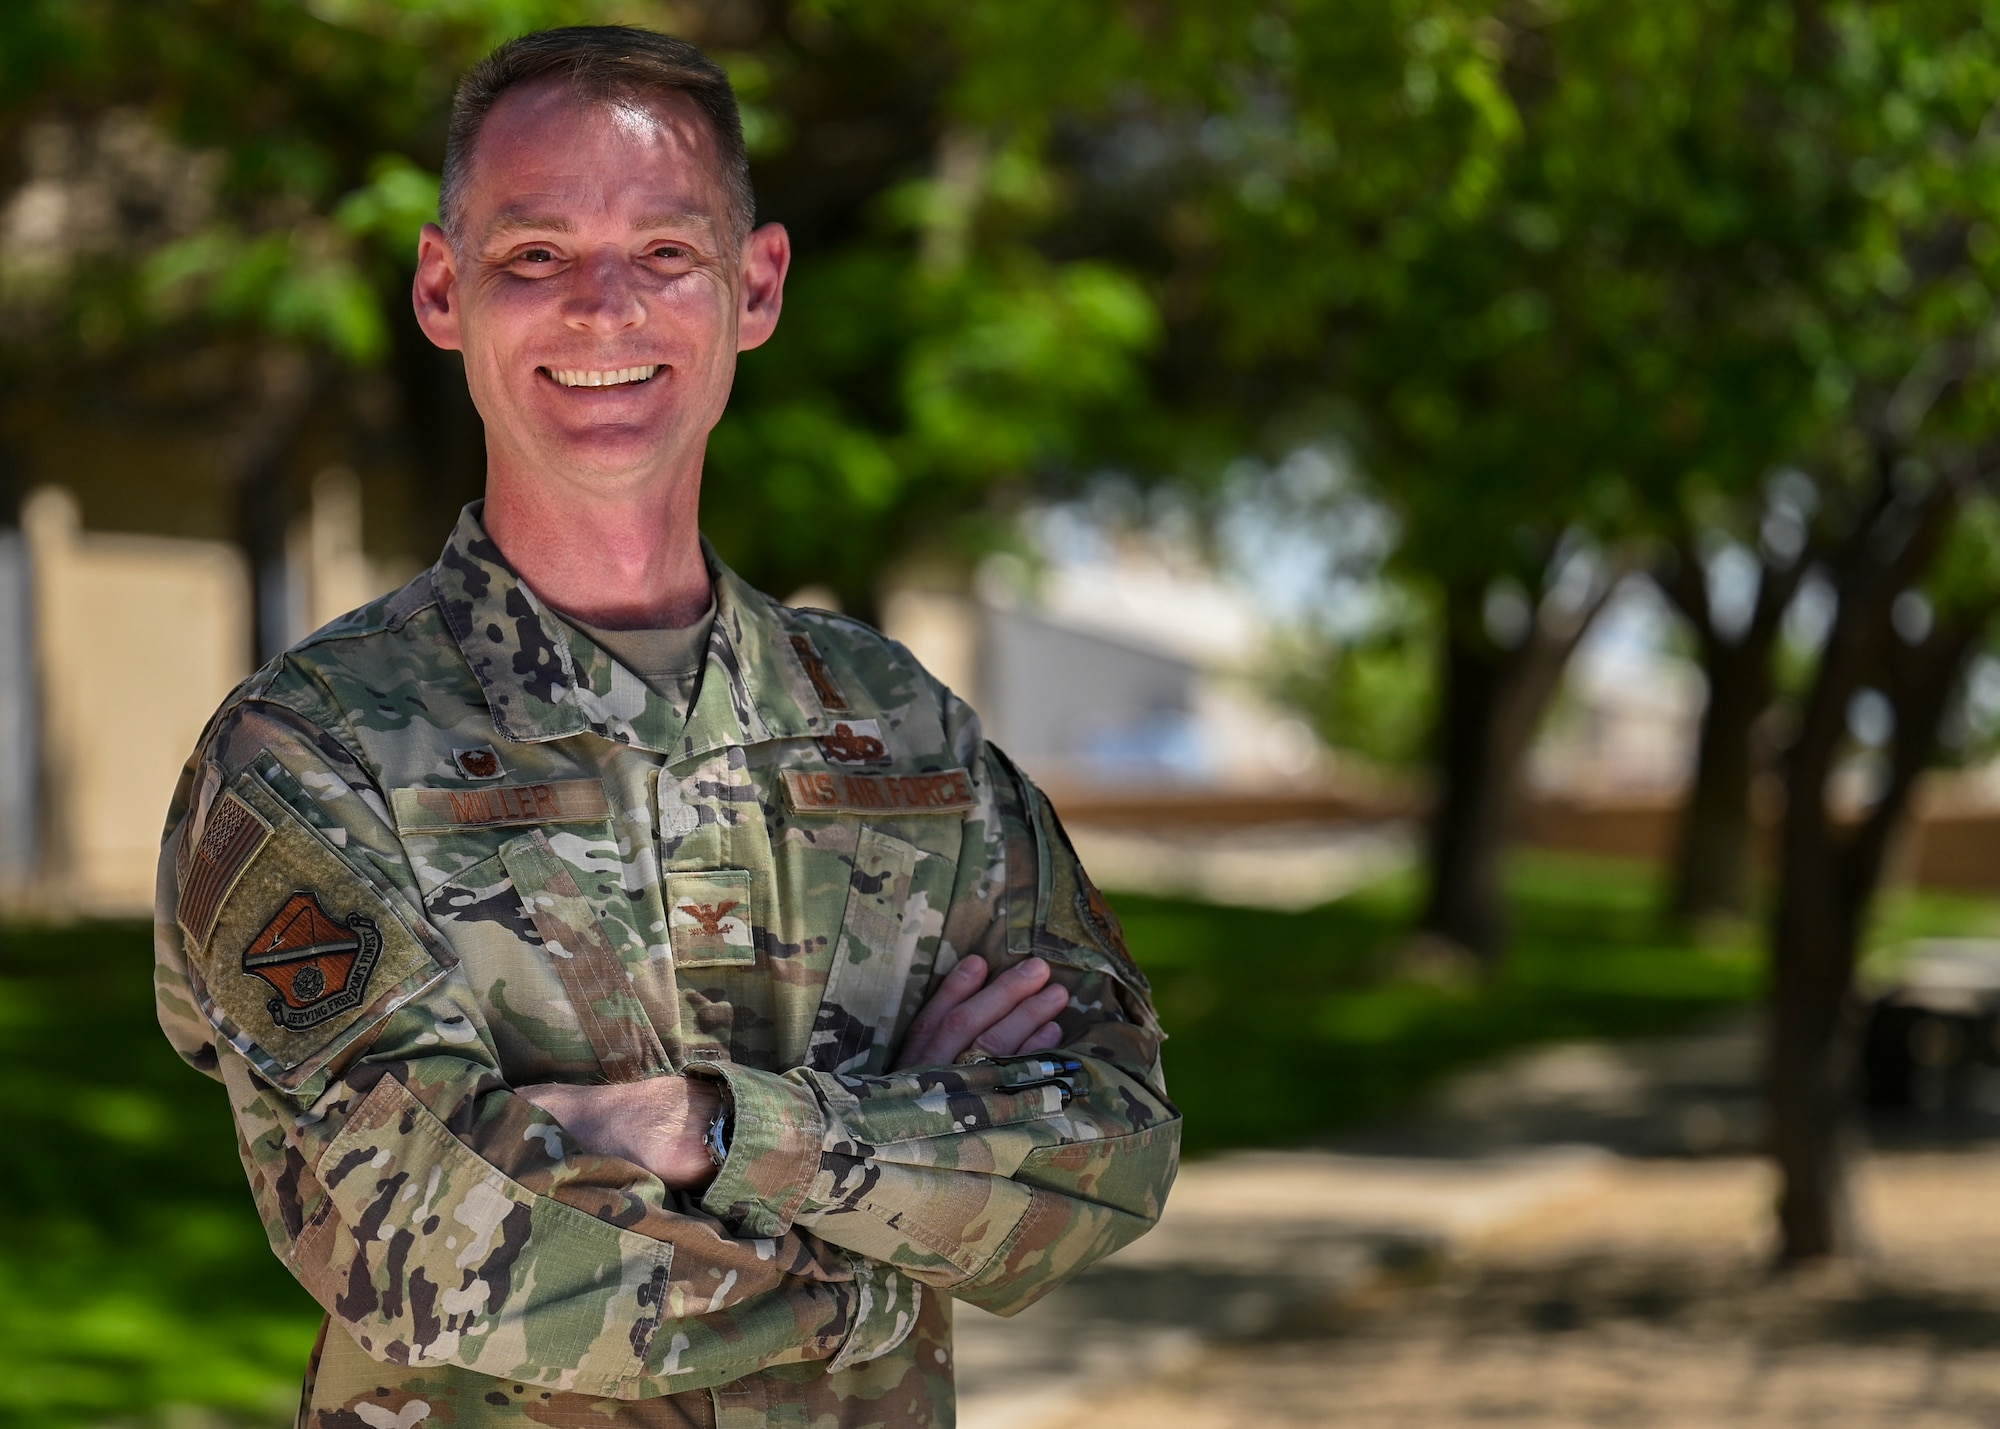 Air Force officer poses for outdoor photo.